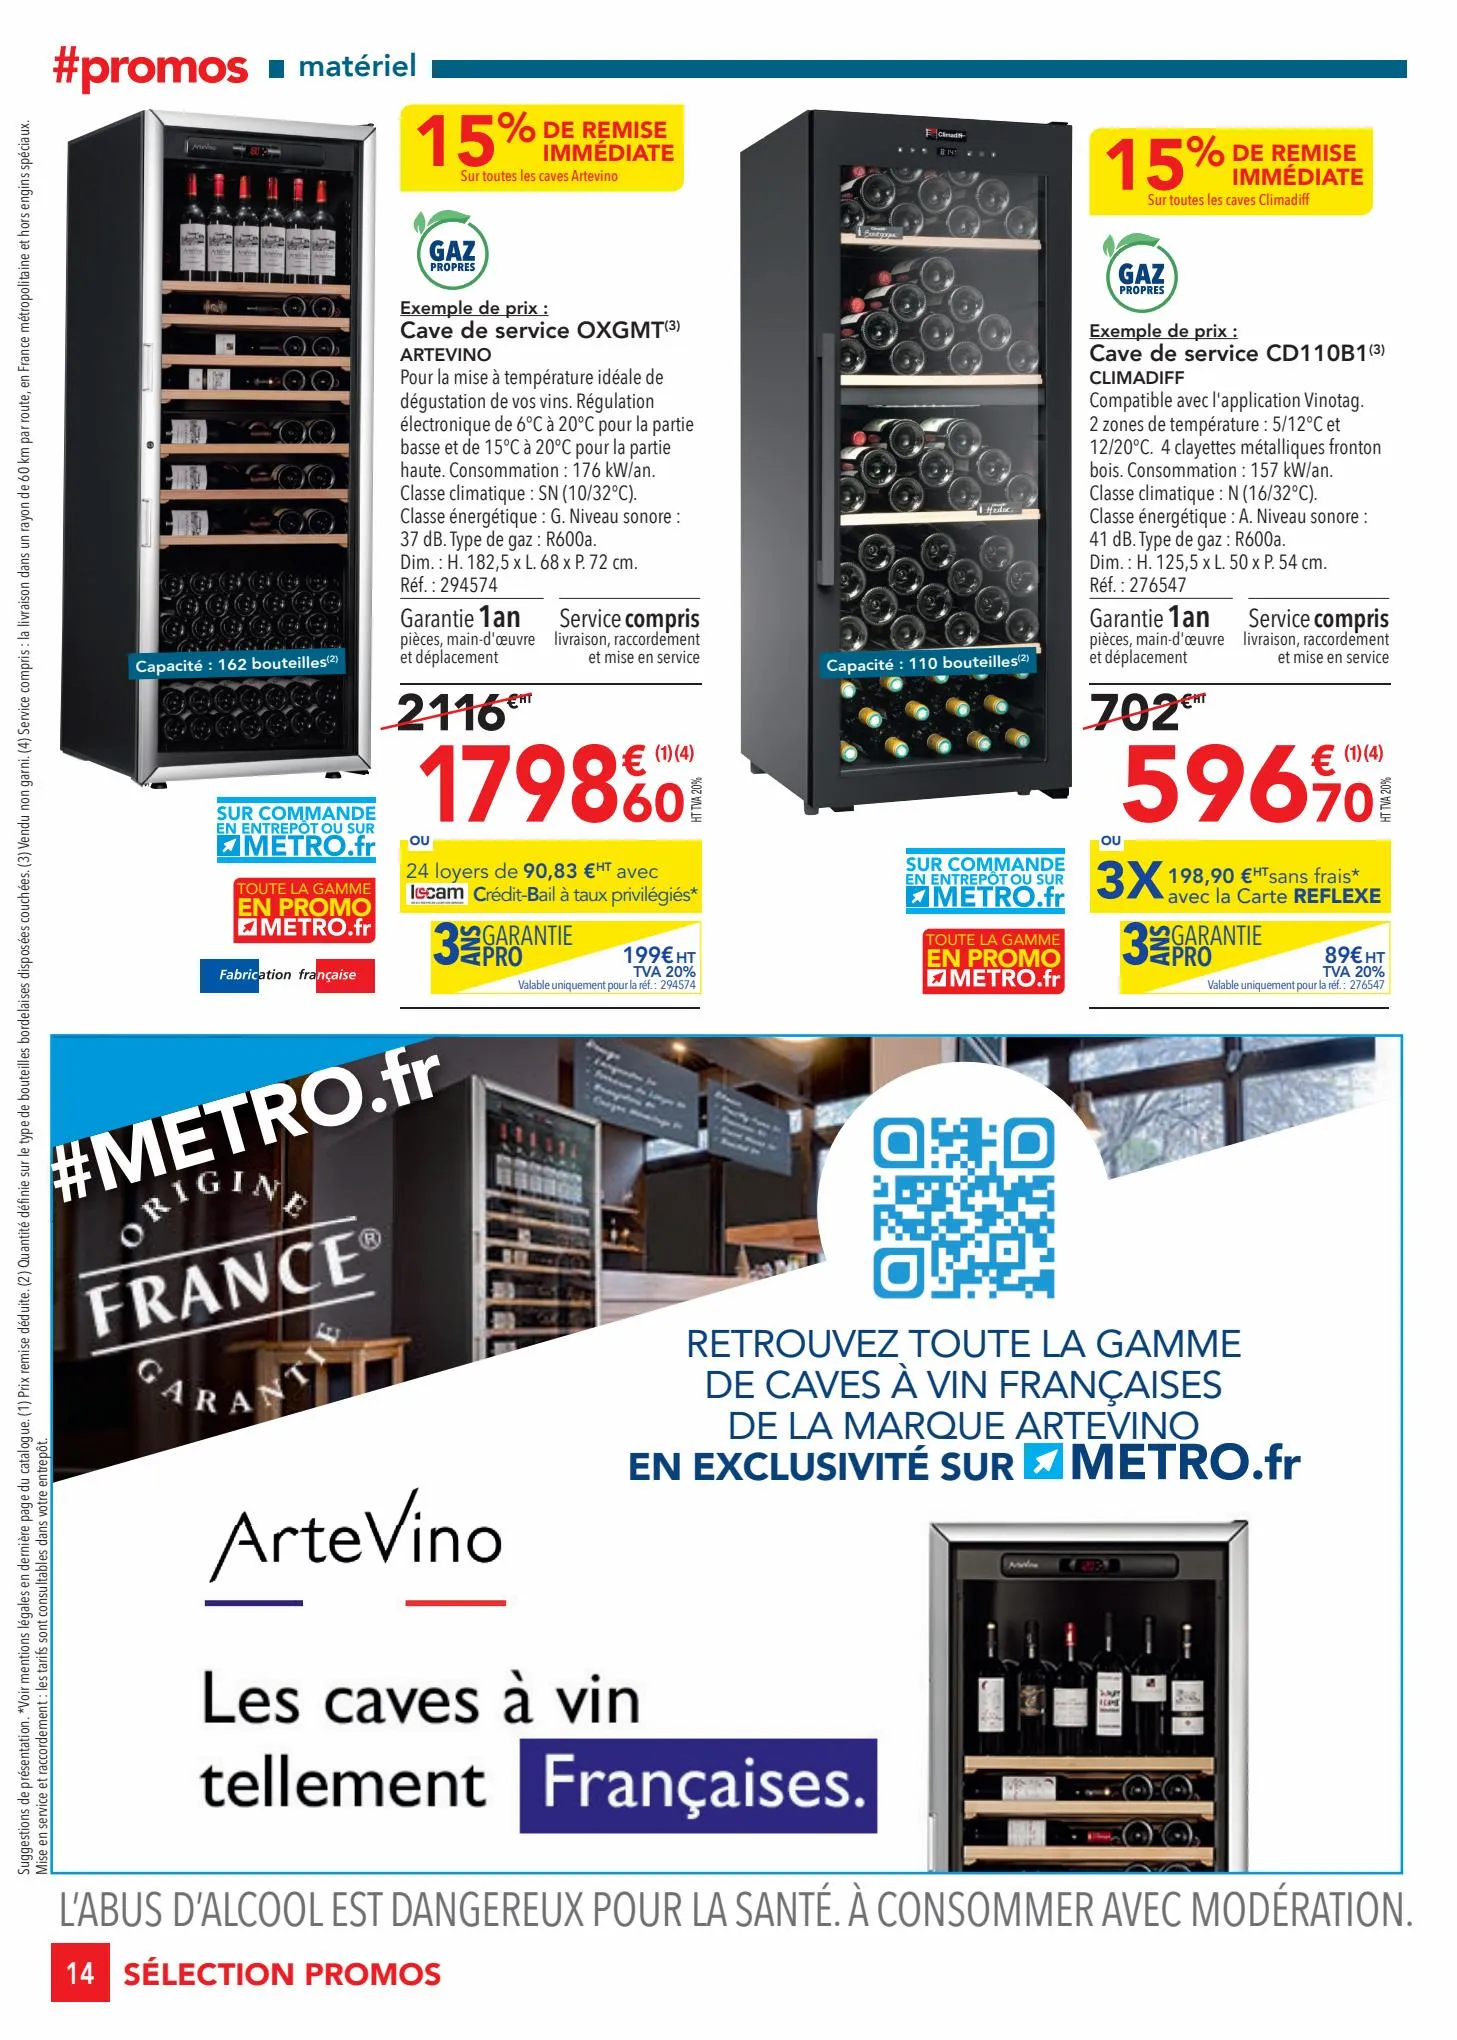 Catalogue Selection Promos Equipement, page 00014